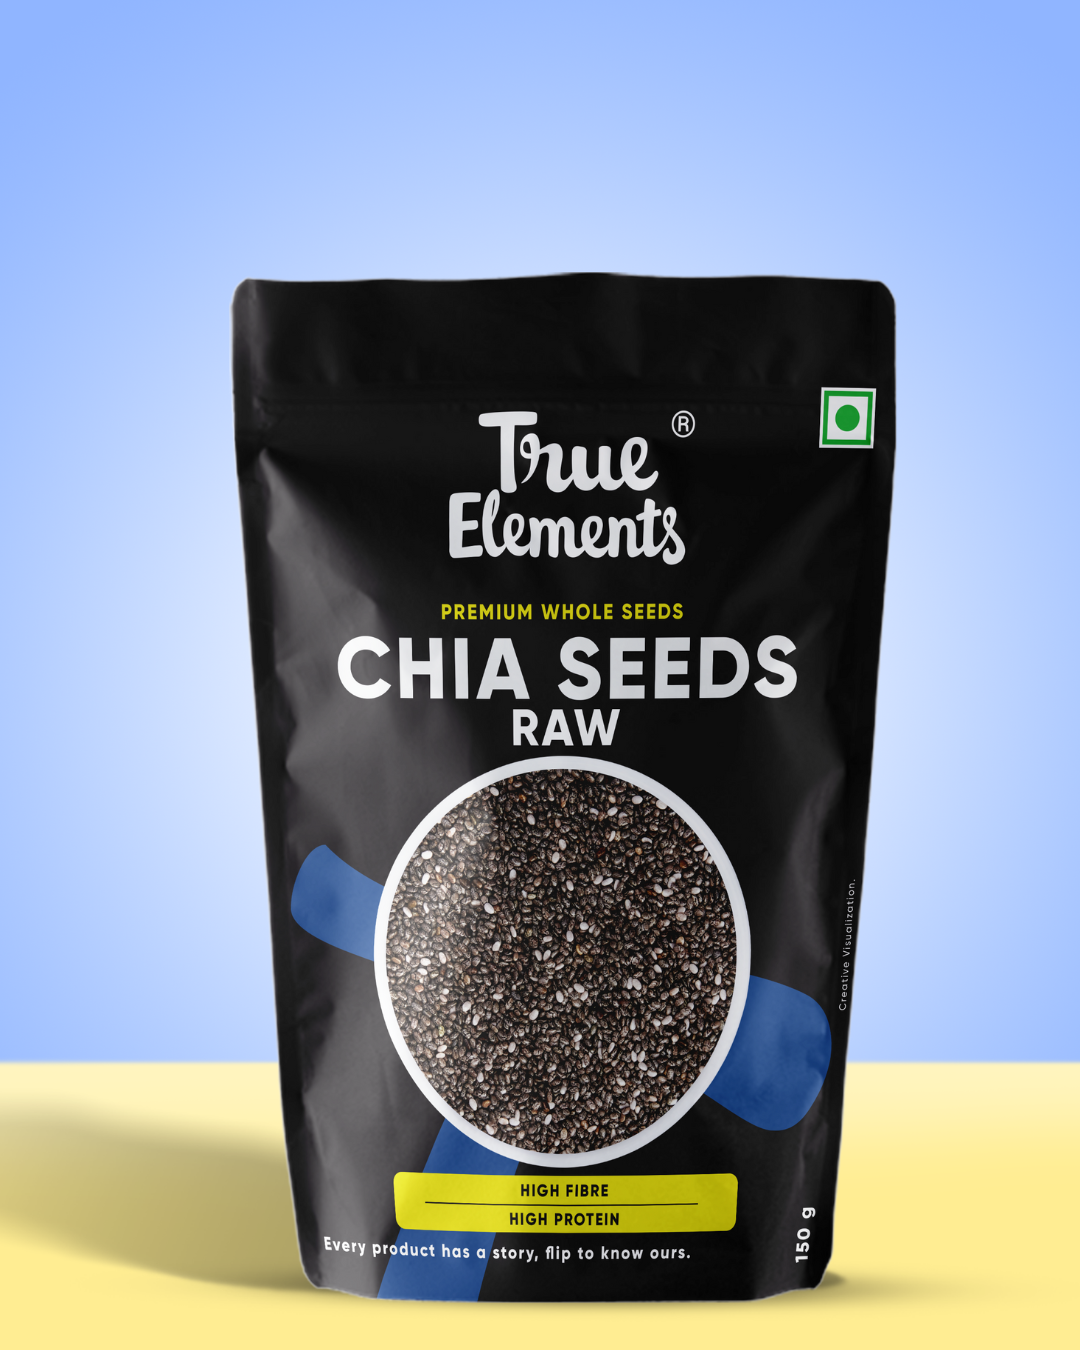 True elements raw chia seeds 150g pouch (Premium Whole Seeds)